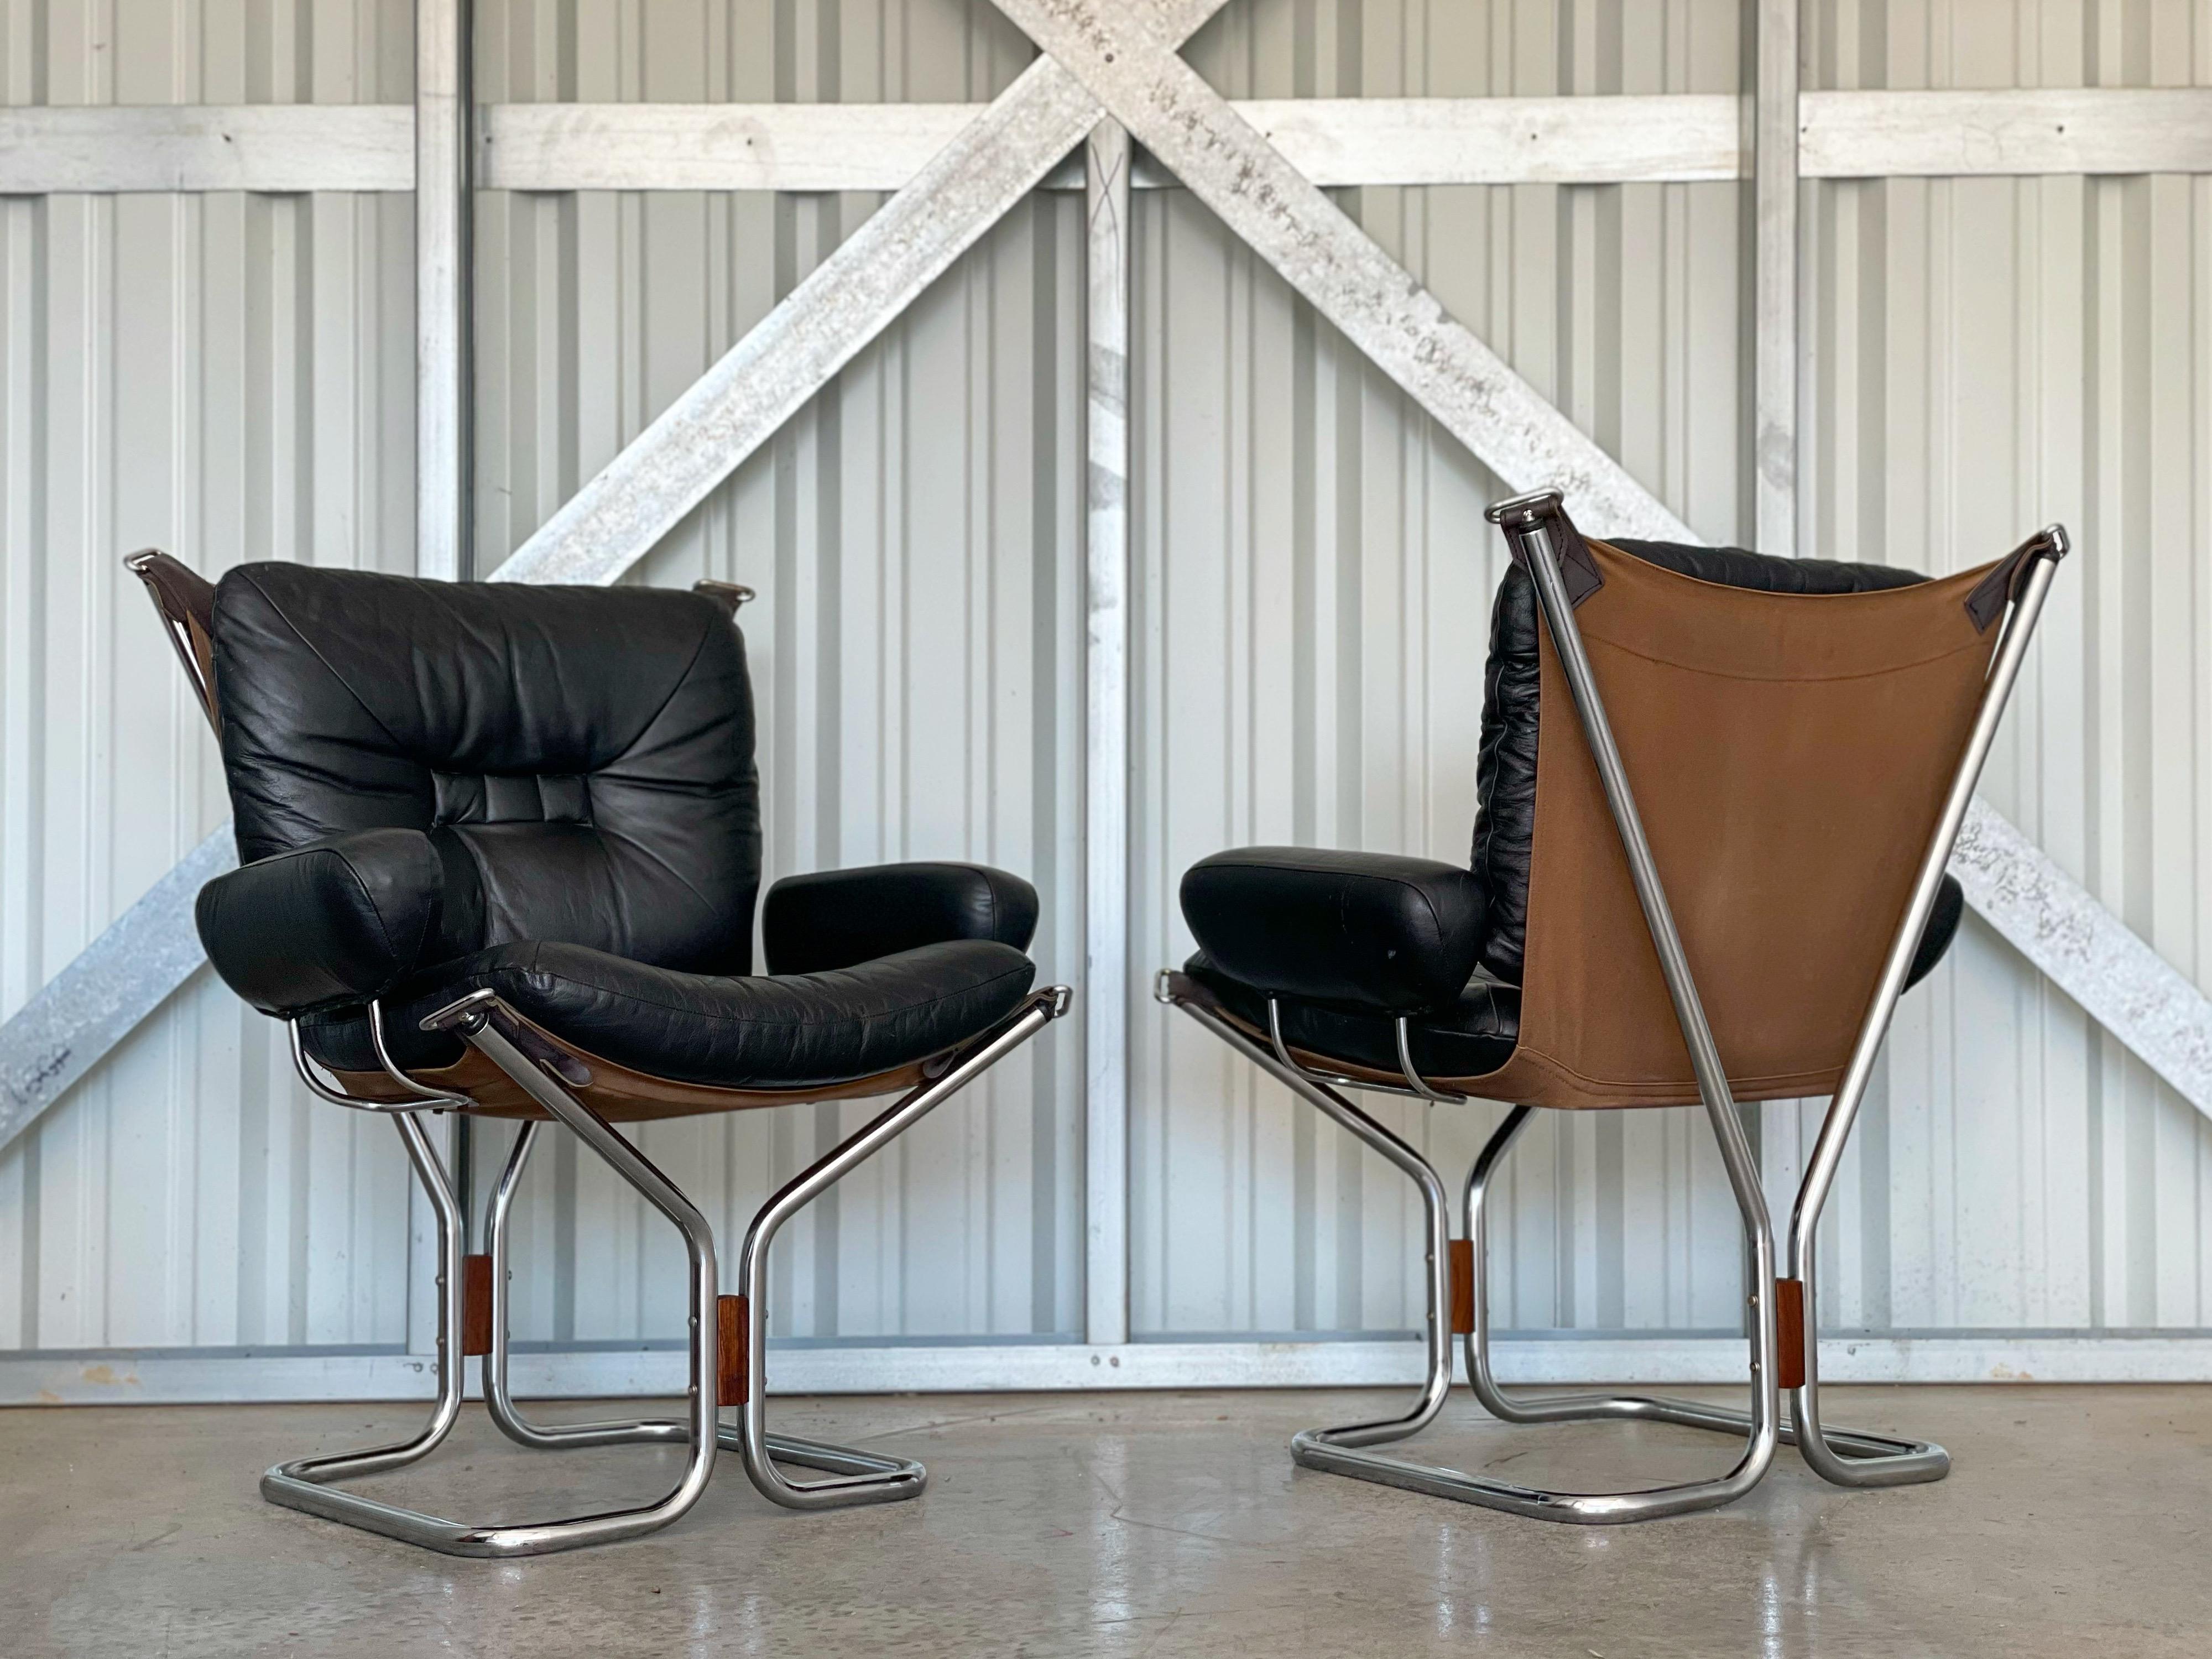 Scandinavian Modern club chairs designed by Ingmar Relling for Westnofa, circa 1970s. Produced in Norway by Westnofa. Perfect juxtaposition of materials; black leather, canvas, chromed steel, brown leather and rosewood. Original black leather